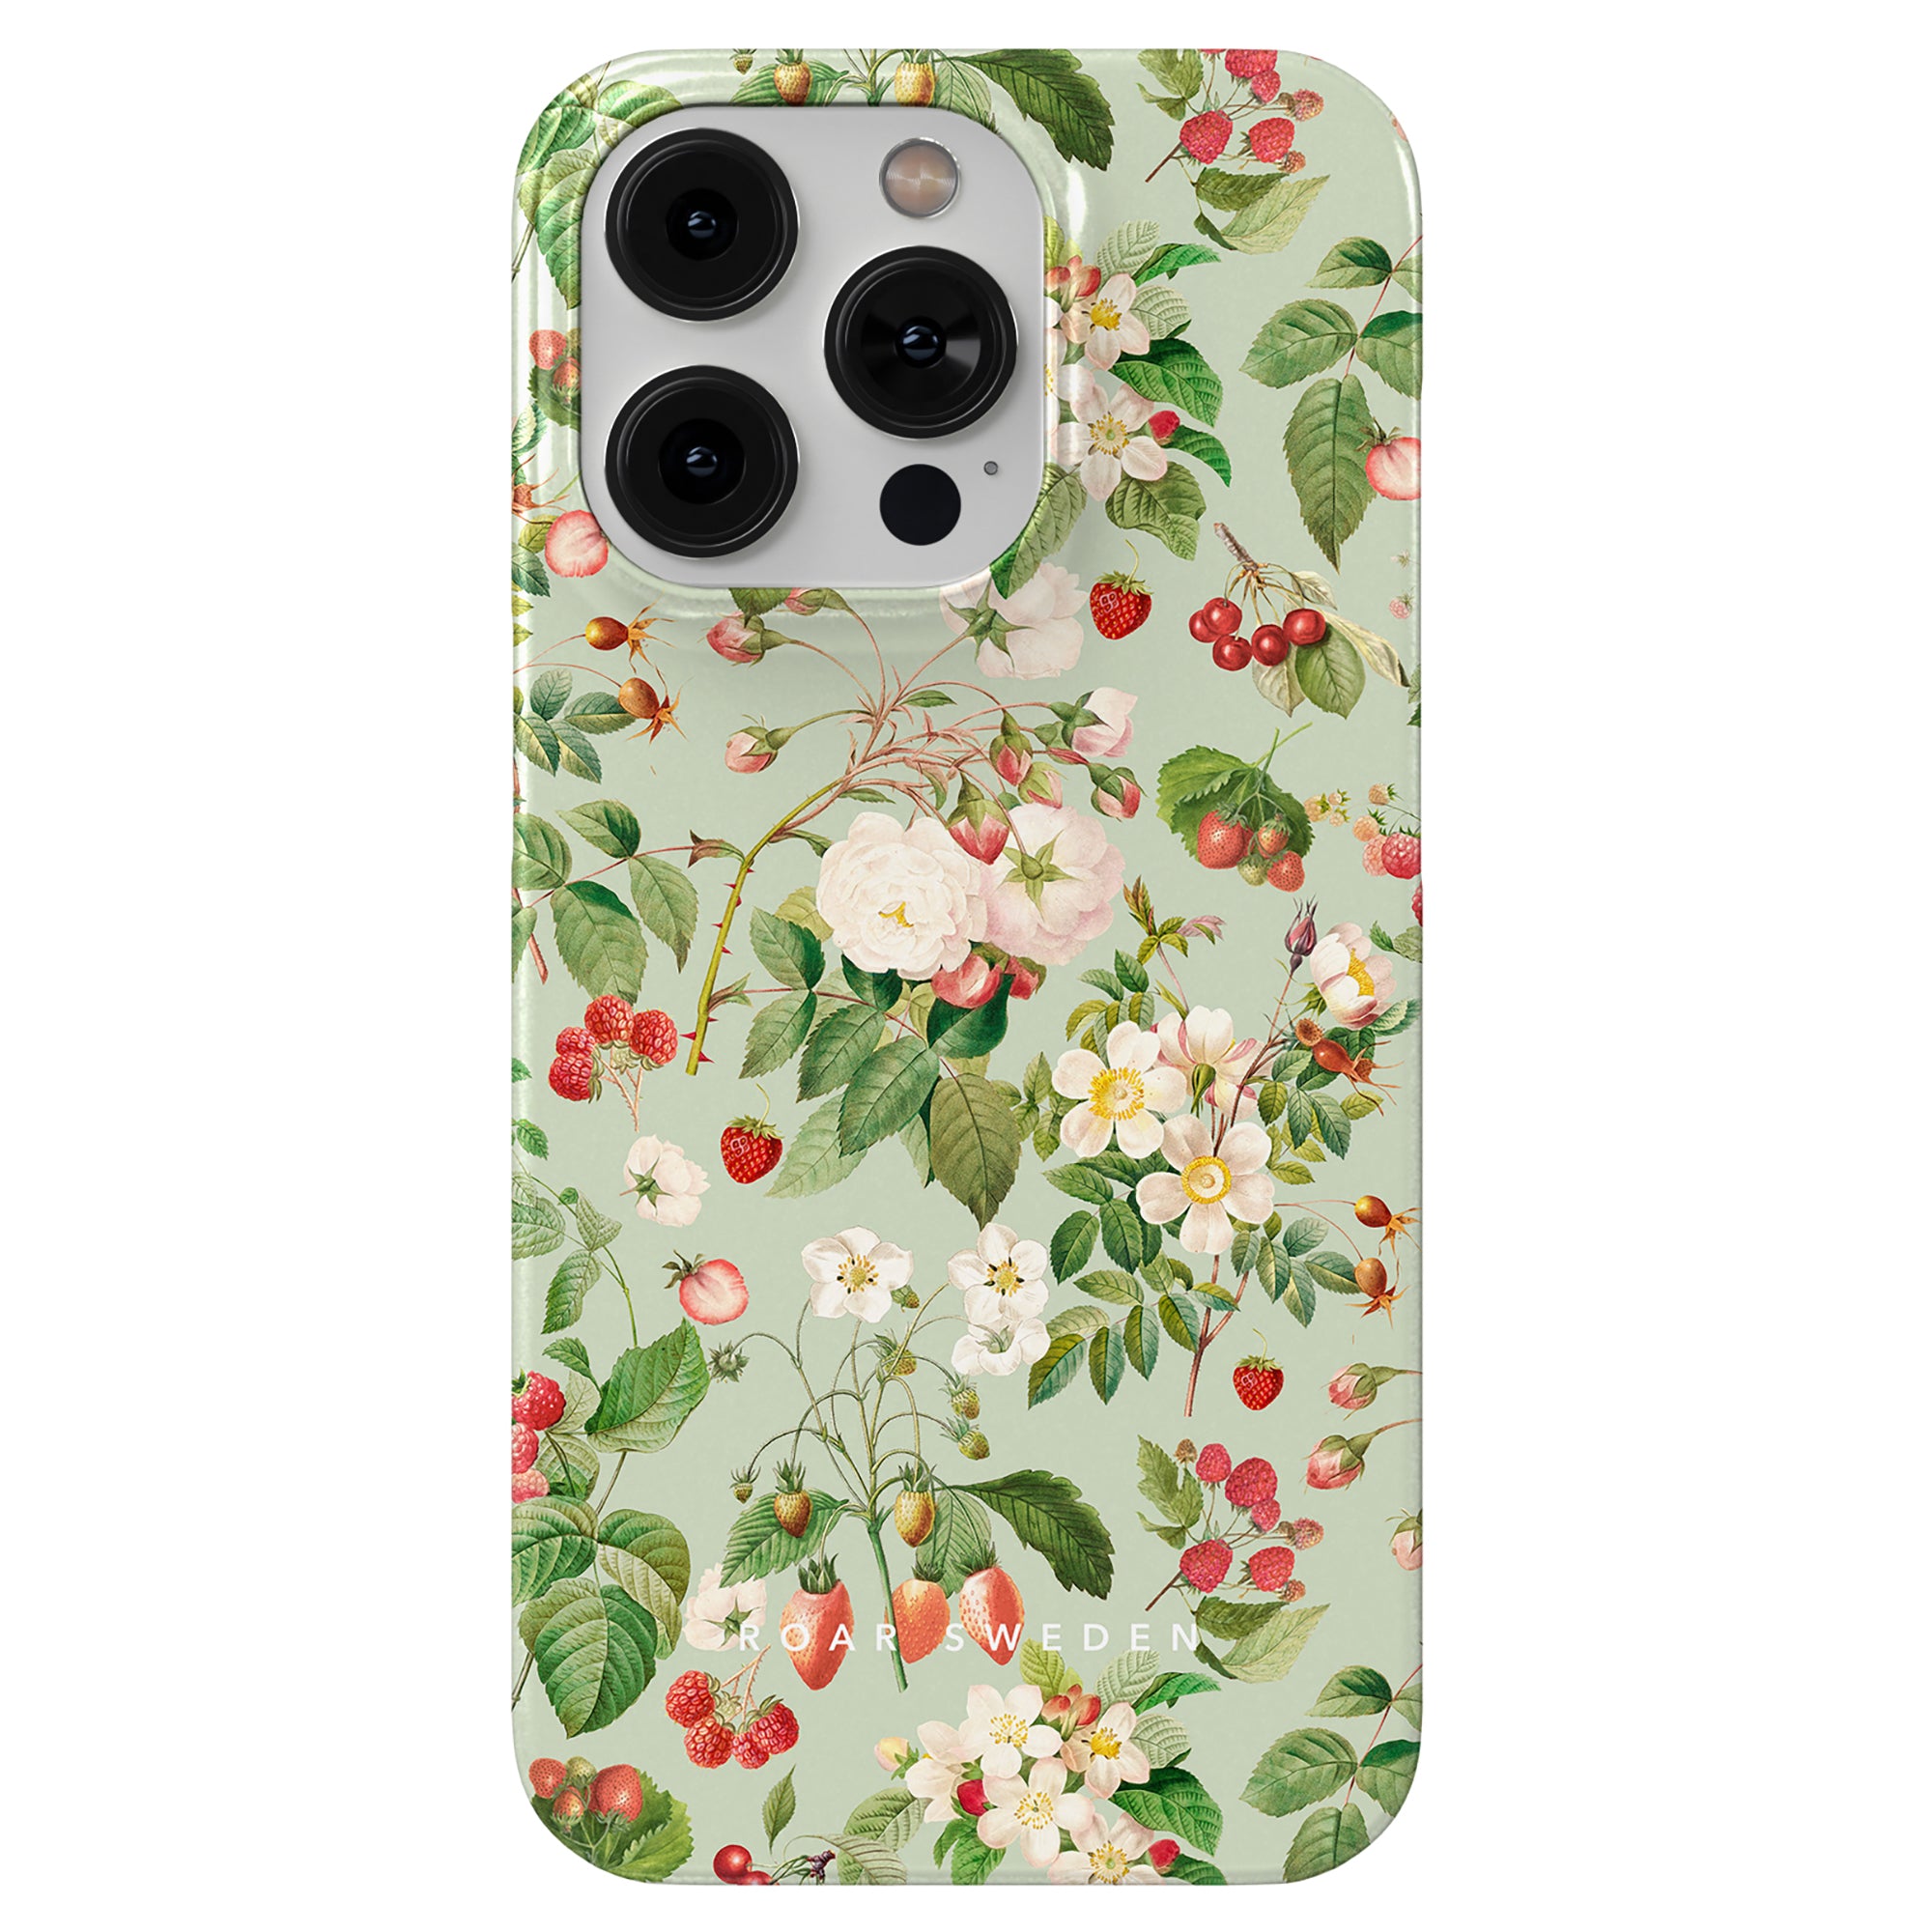 Enhance your device's look with this Tasty Garden slim case, designed meticulously with precise camera cutouts for easy access.